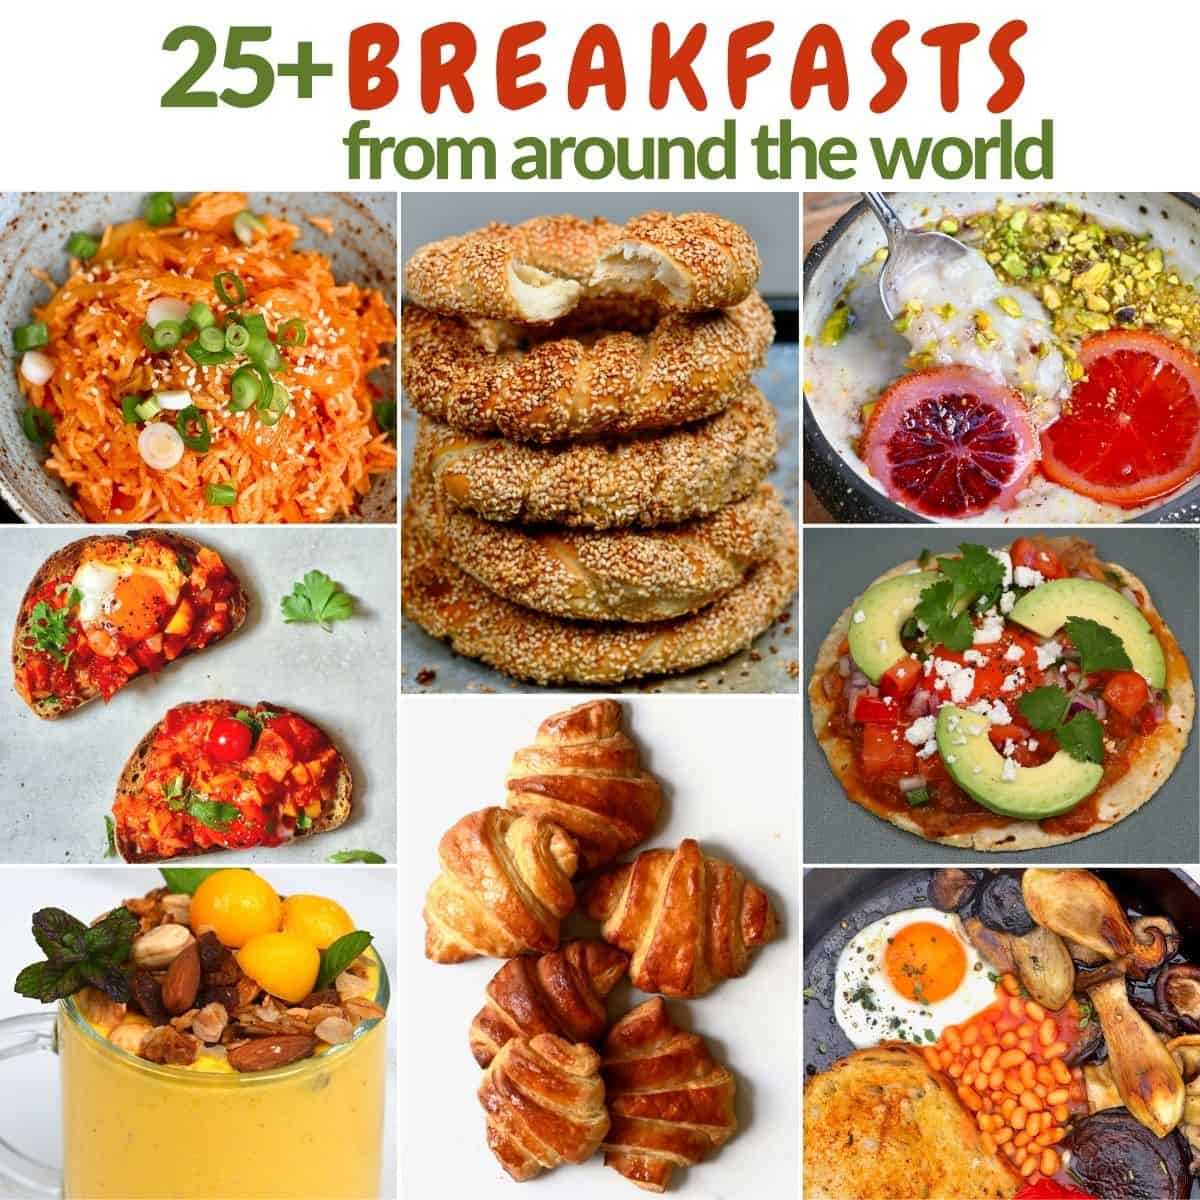 https://www.alphafoodie.com/wp-content/uploads/2022/02/Breakfasts-From-Around-The-World-square.jpeg